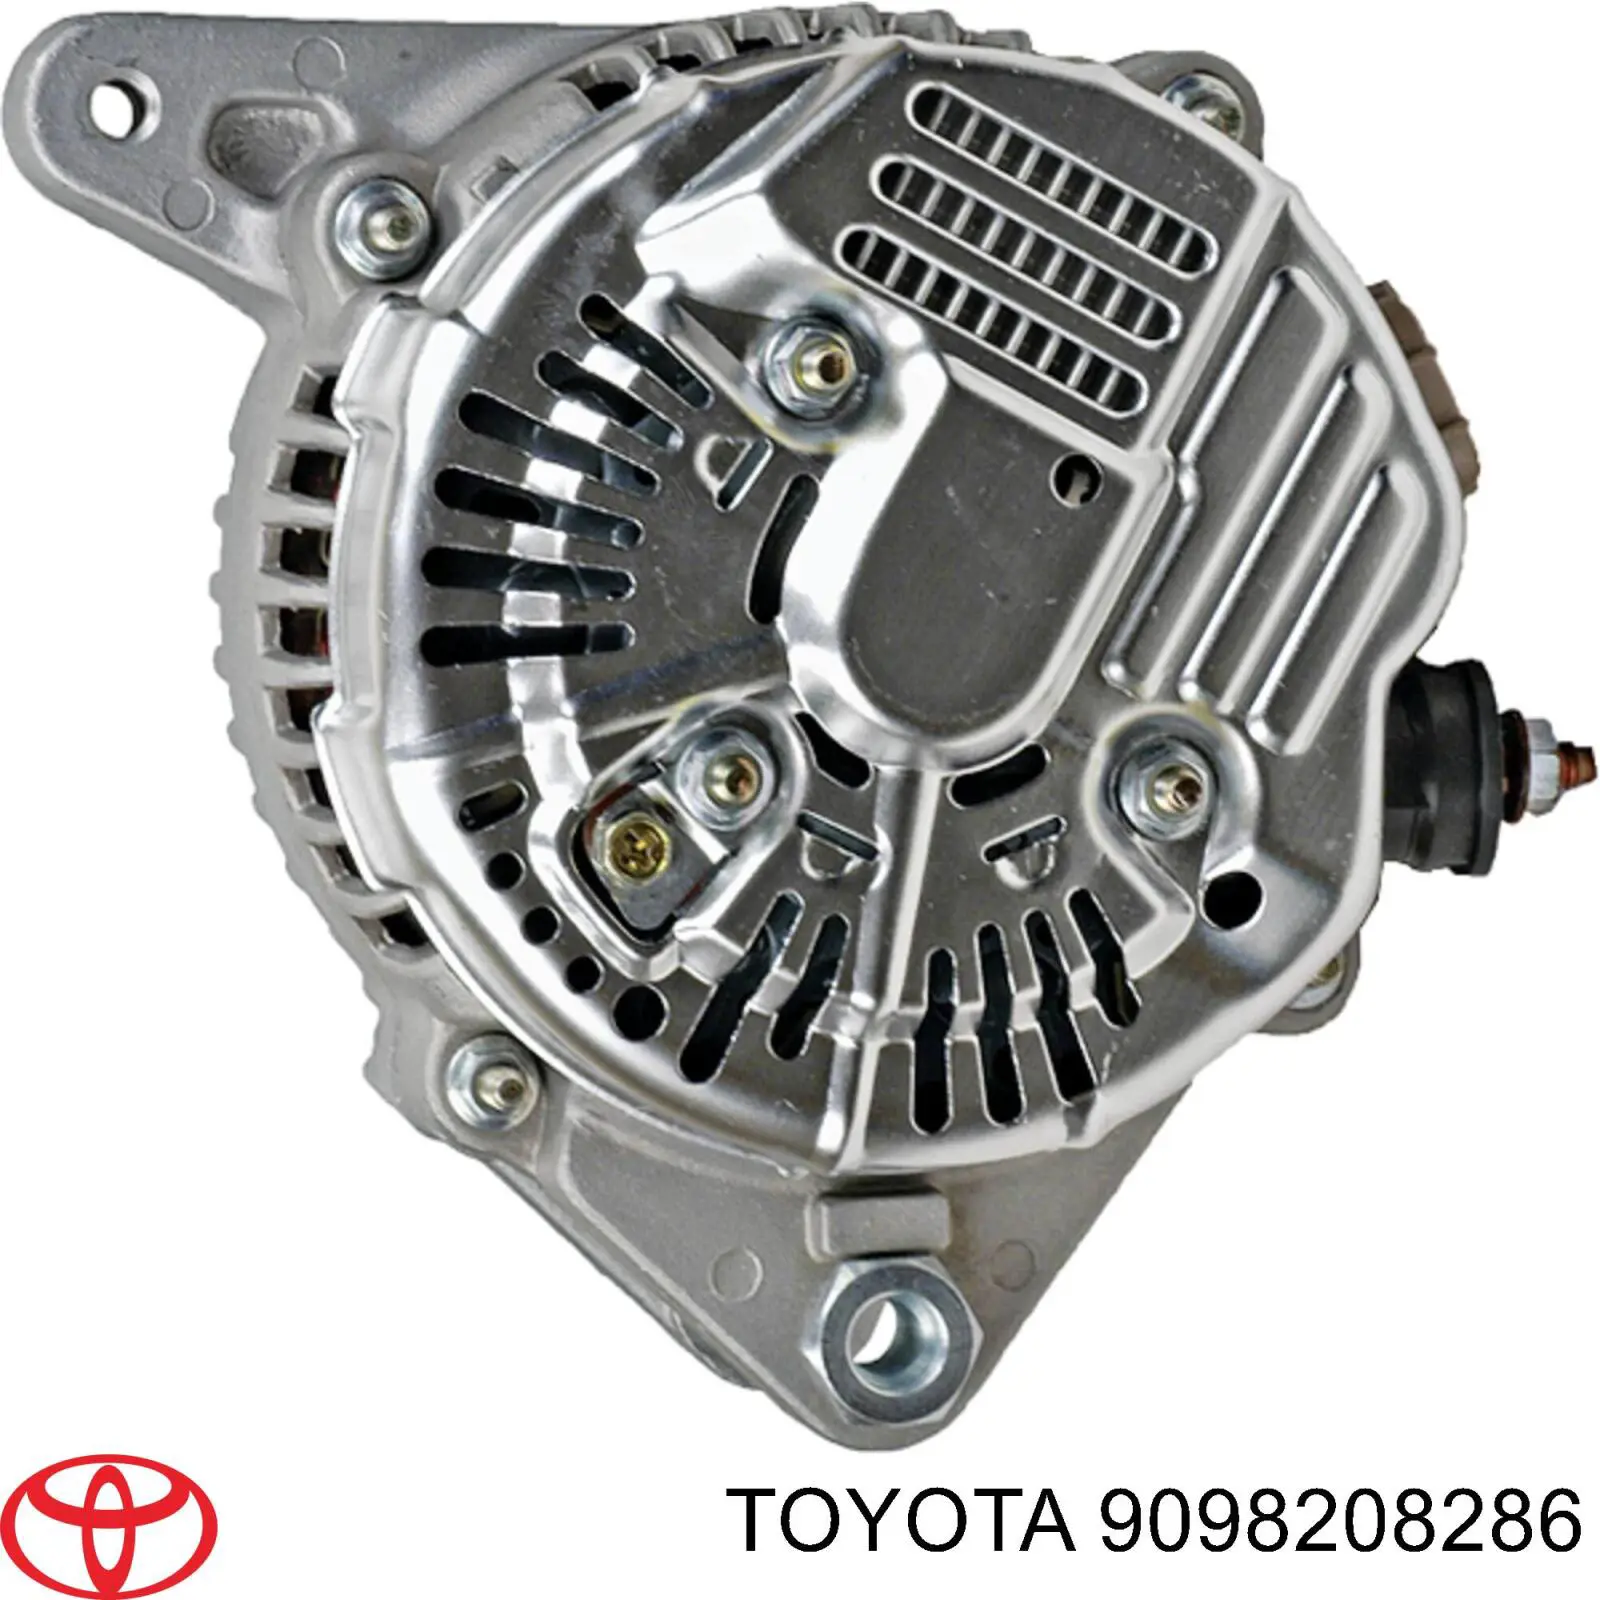 9098208286 Toyota fusible